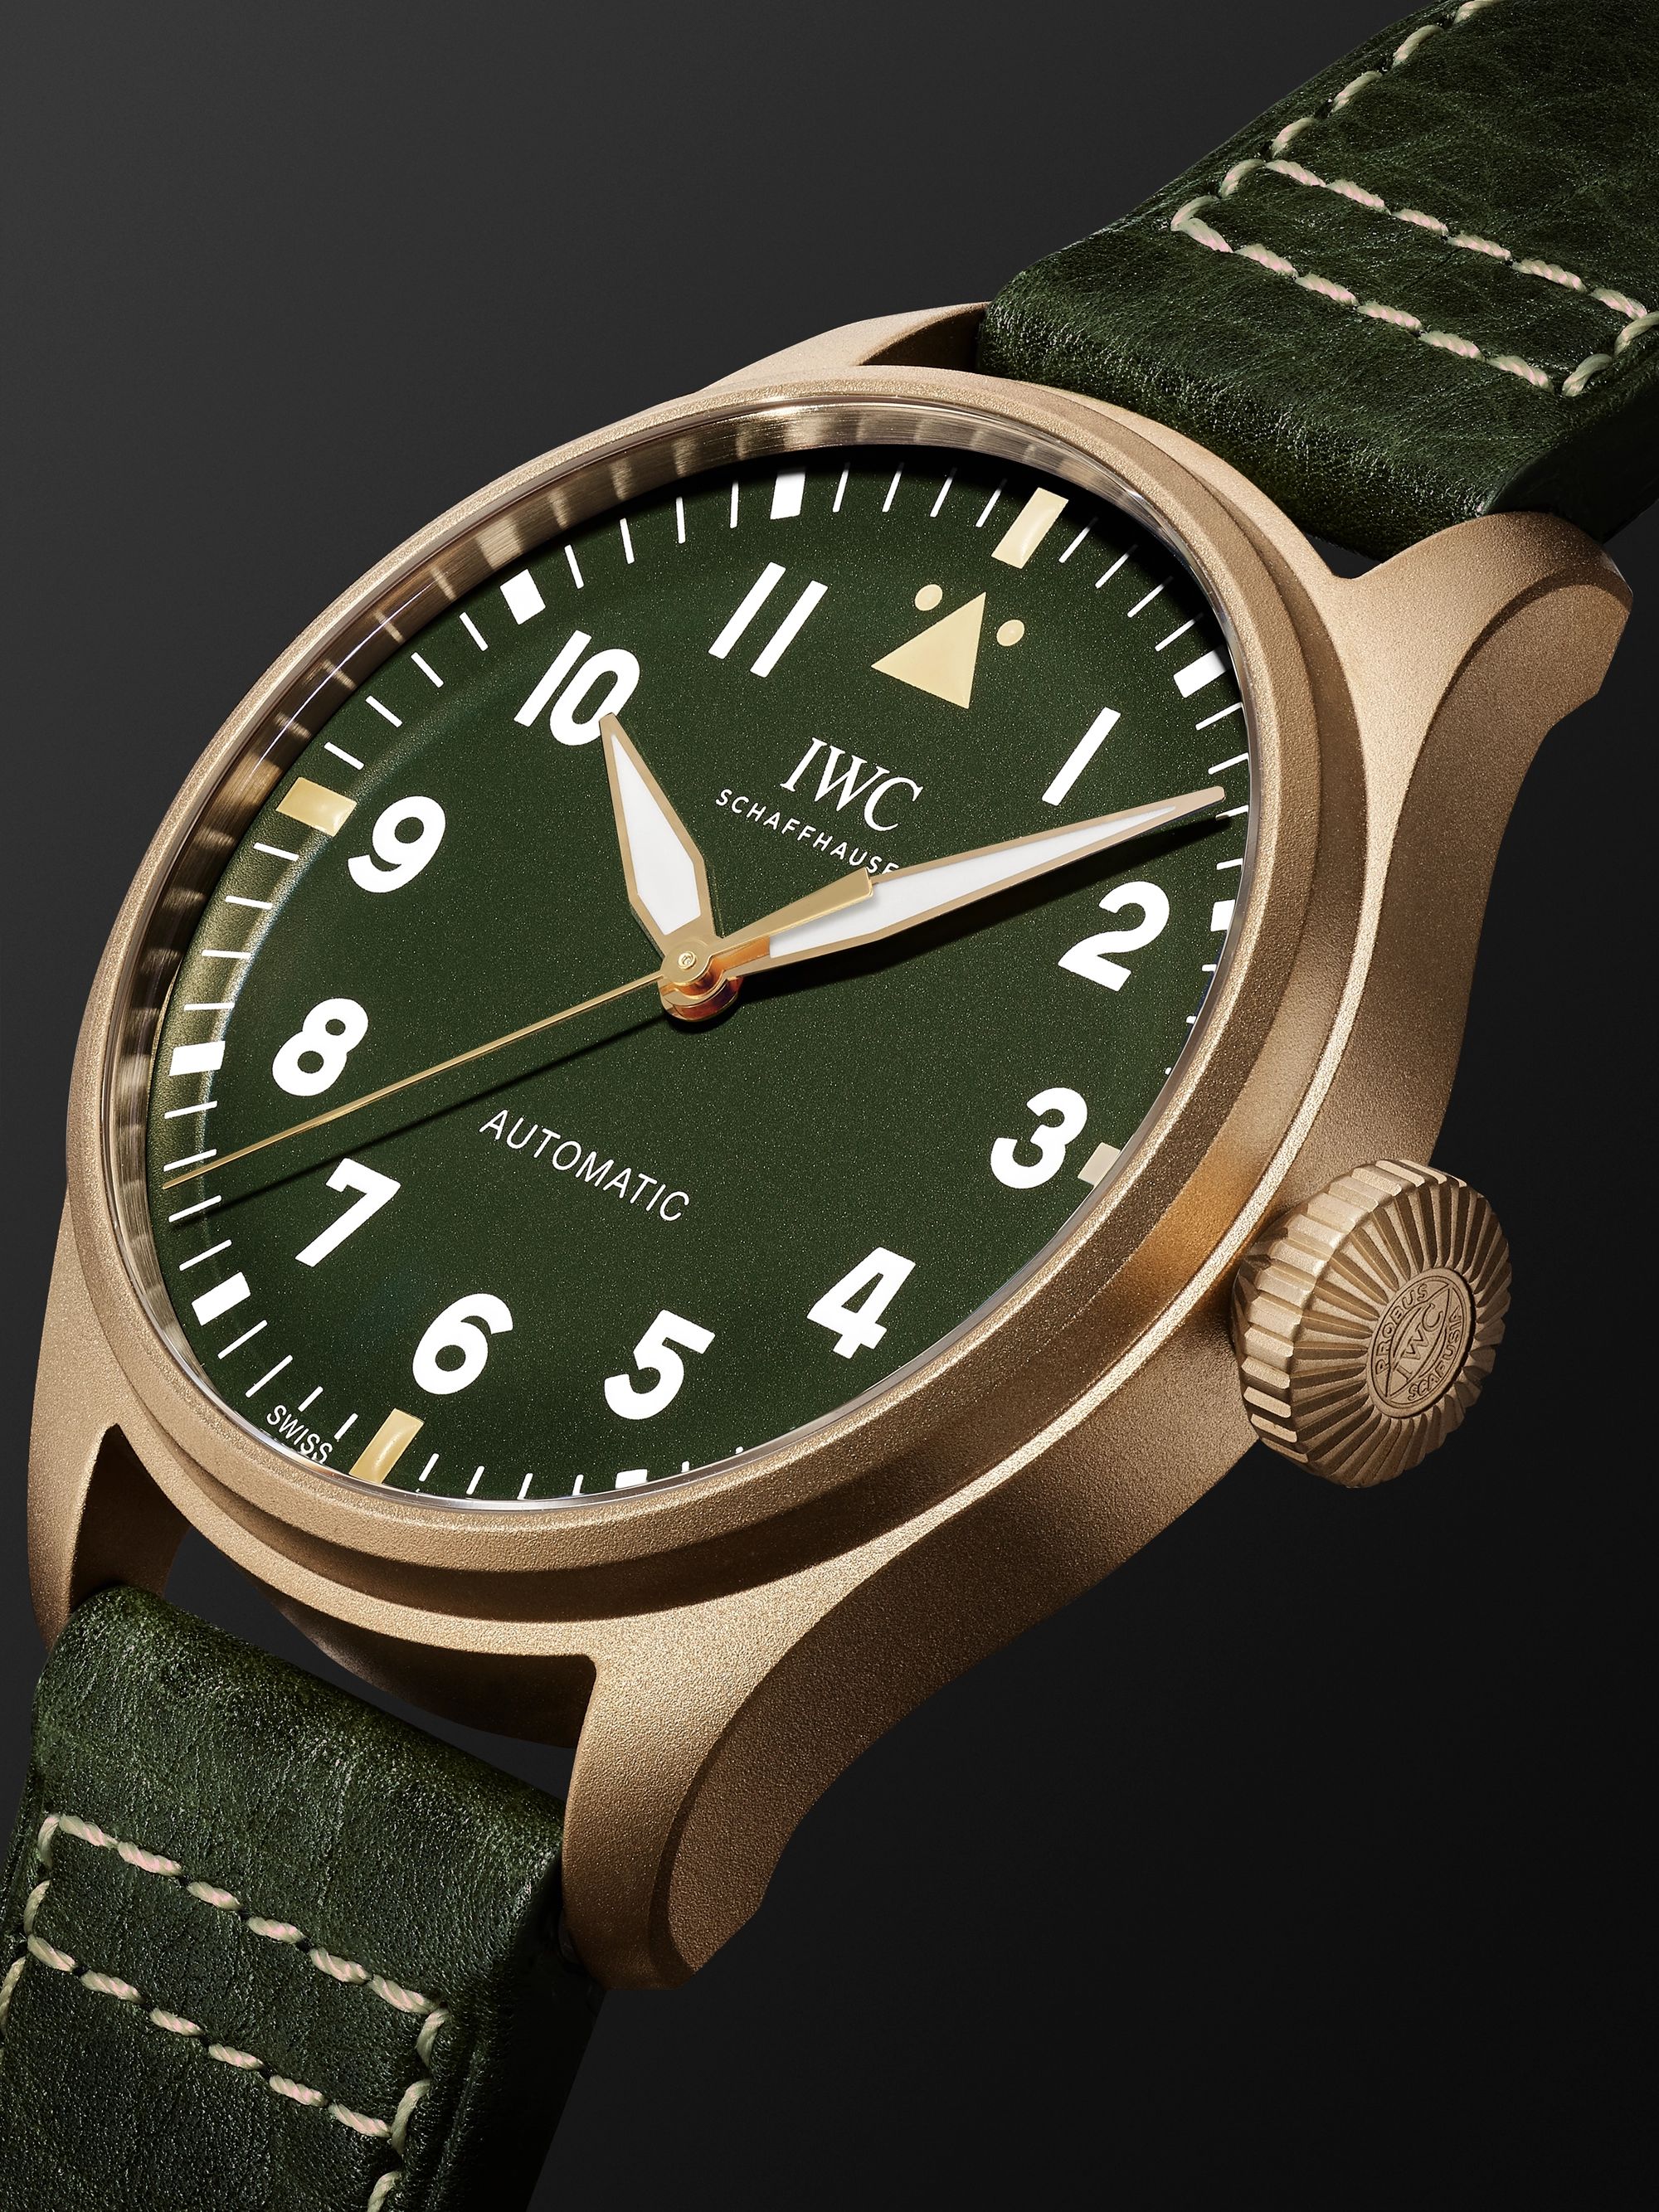 Big Pilot's Spitfire Automatic 43mm Bronze and Leather Watch, Ref. No.  IW329702